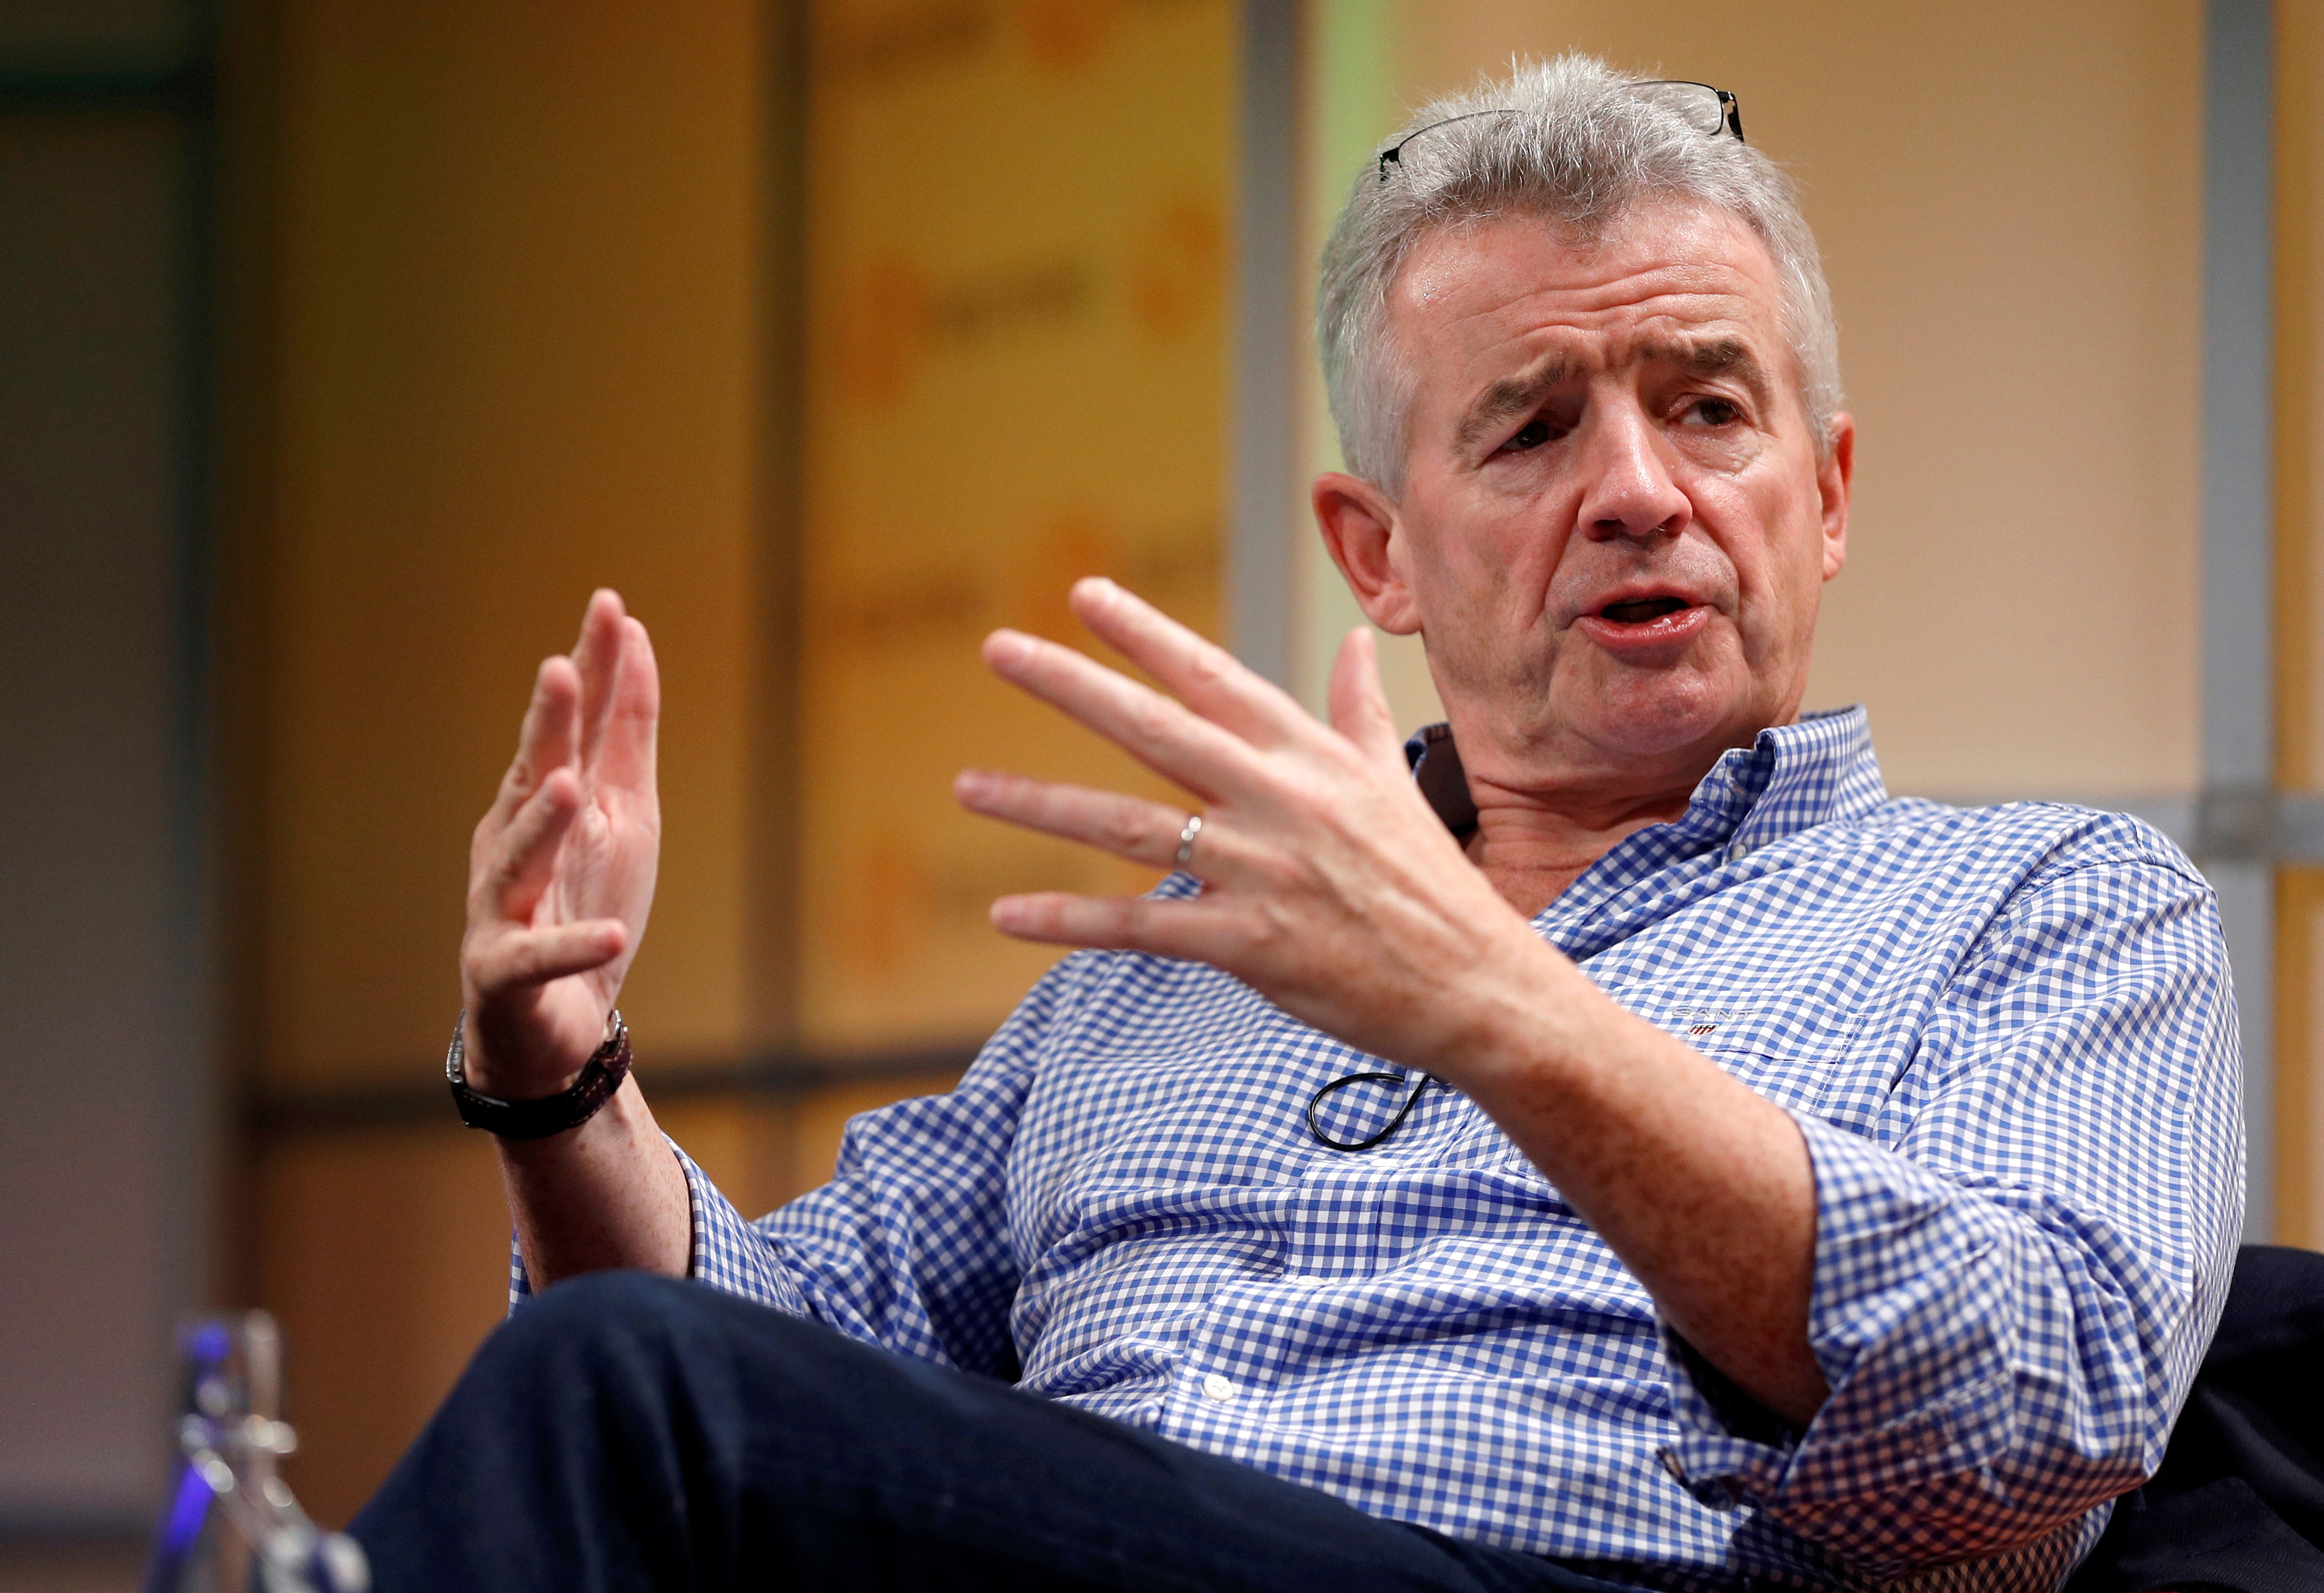 Ryanair Chief Executive Michael O'Leary attends a Reuters Newsmaker event in London